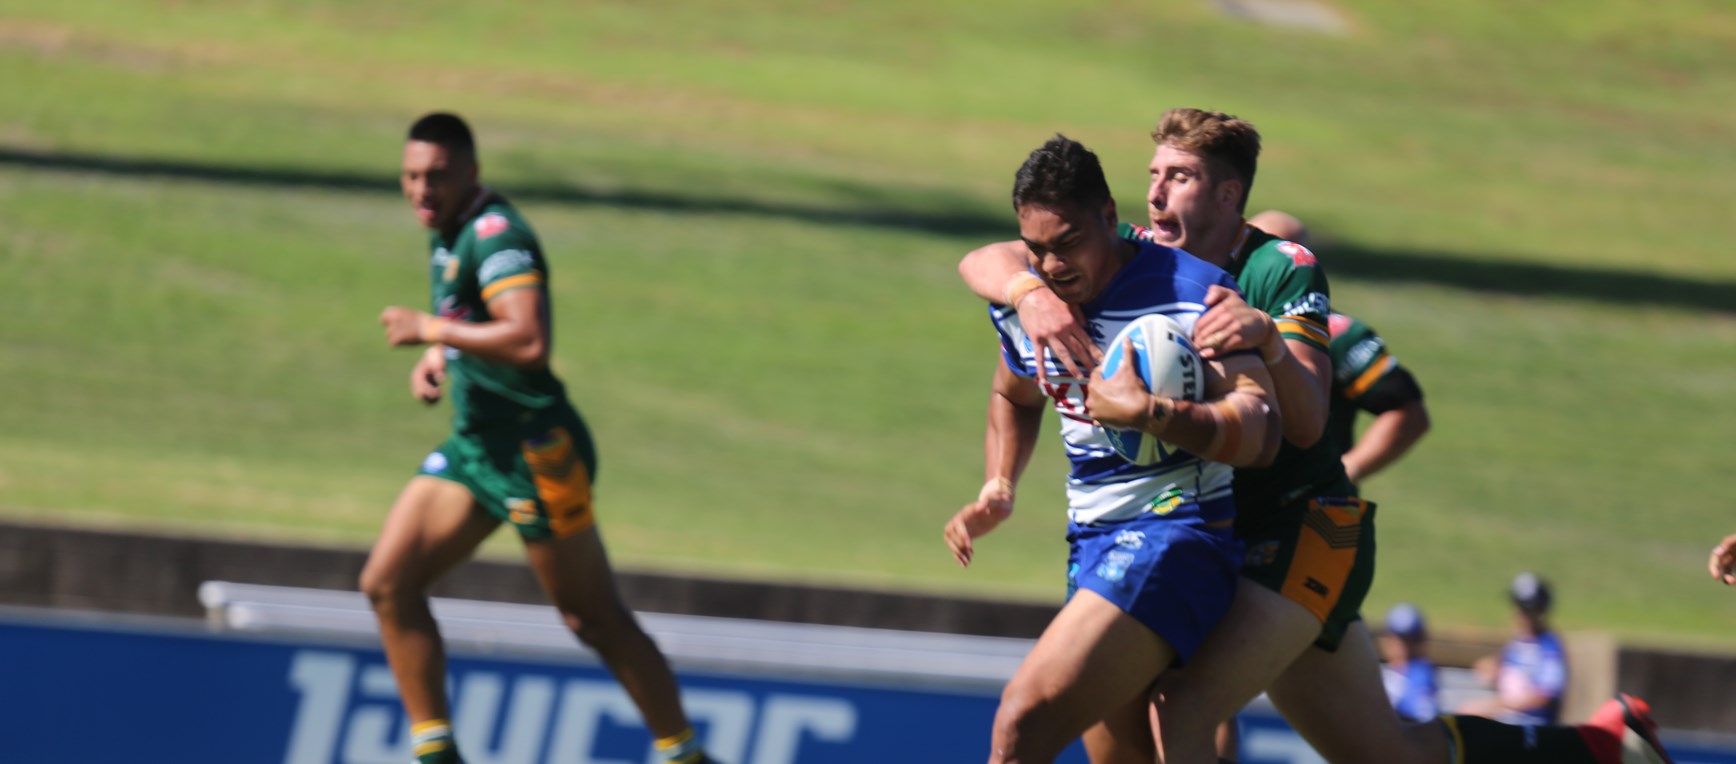 GALLERY | ISP Bulldogs defeat Wyong at home